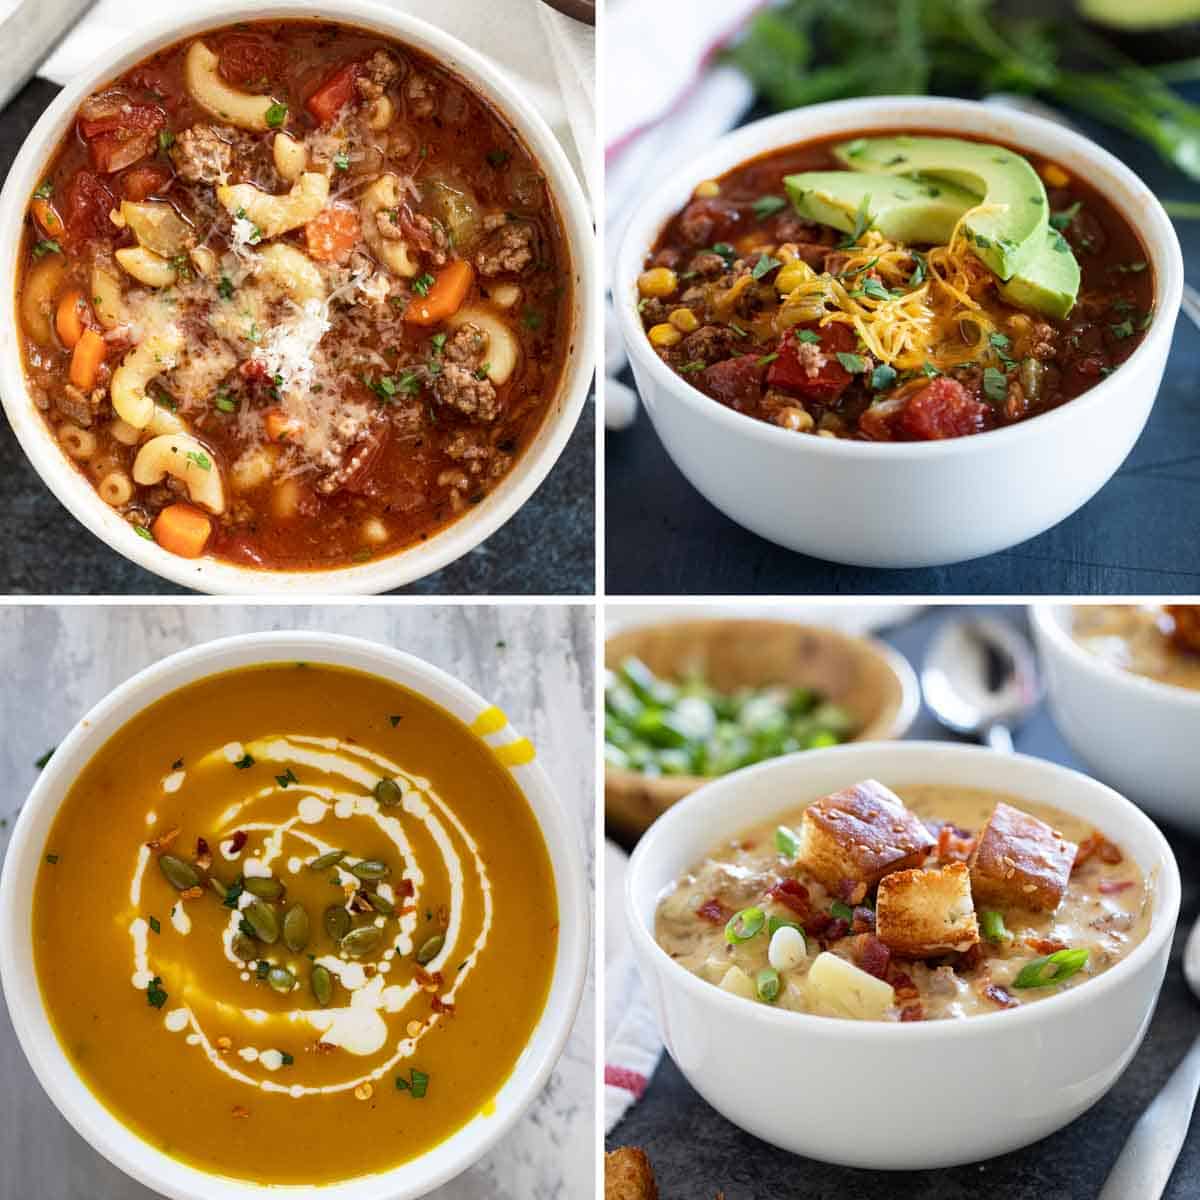 photos of hamburger soup, taco soup, curried butternut squash soup, and cheeseburger chowder.